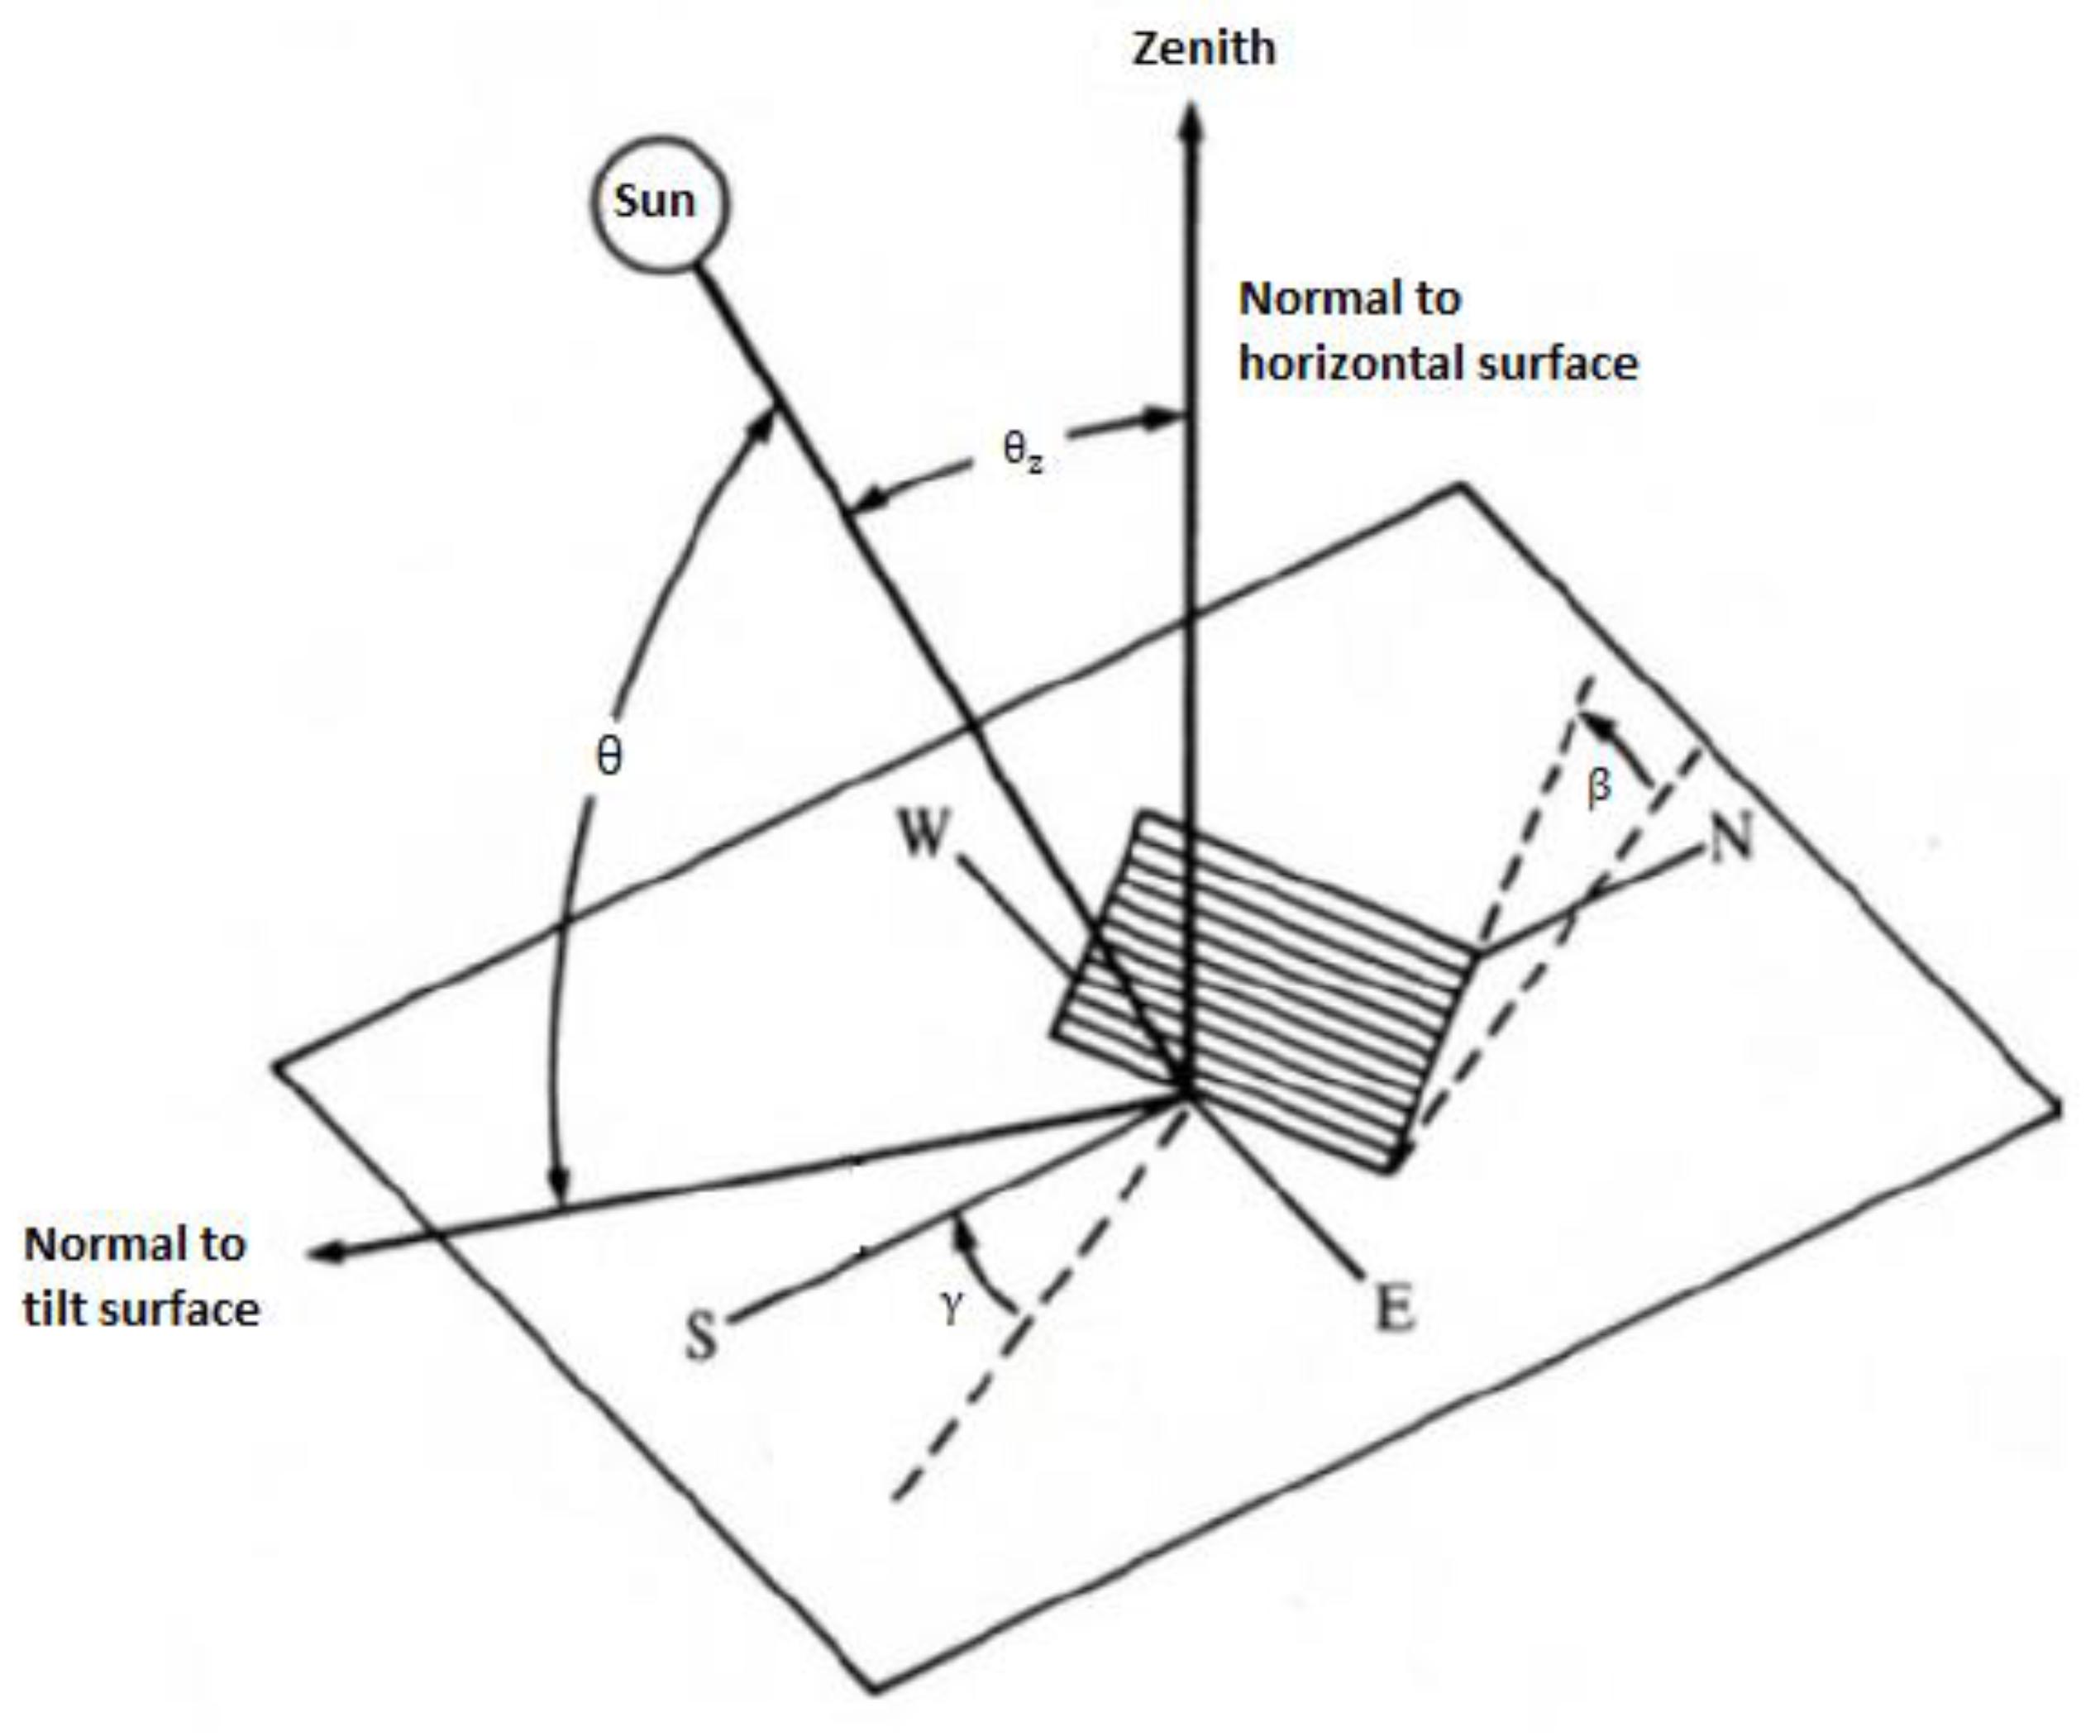 angle of incidence solar panel - What is photovoltaic angle of incidence